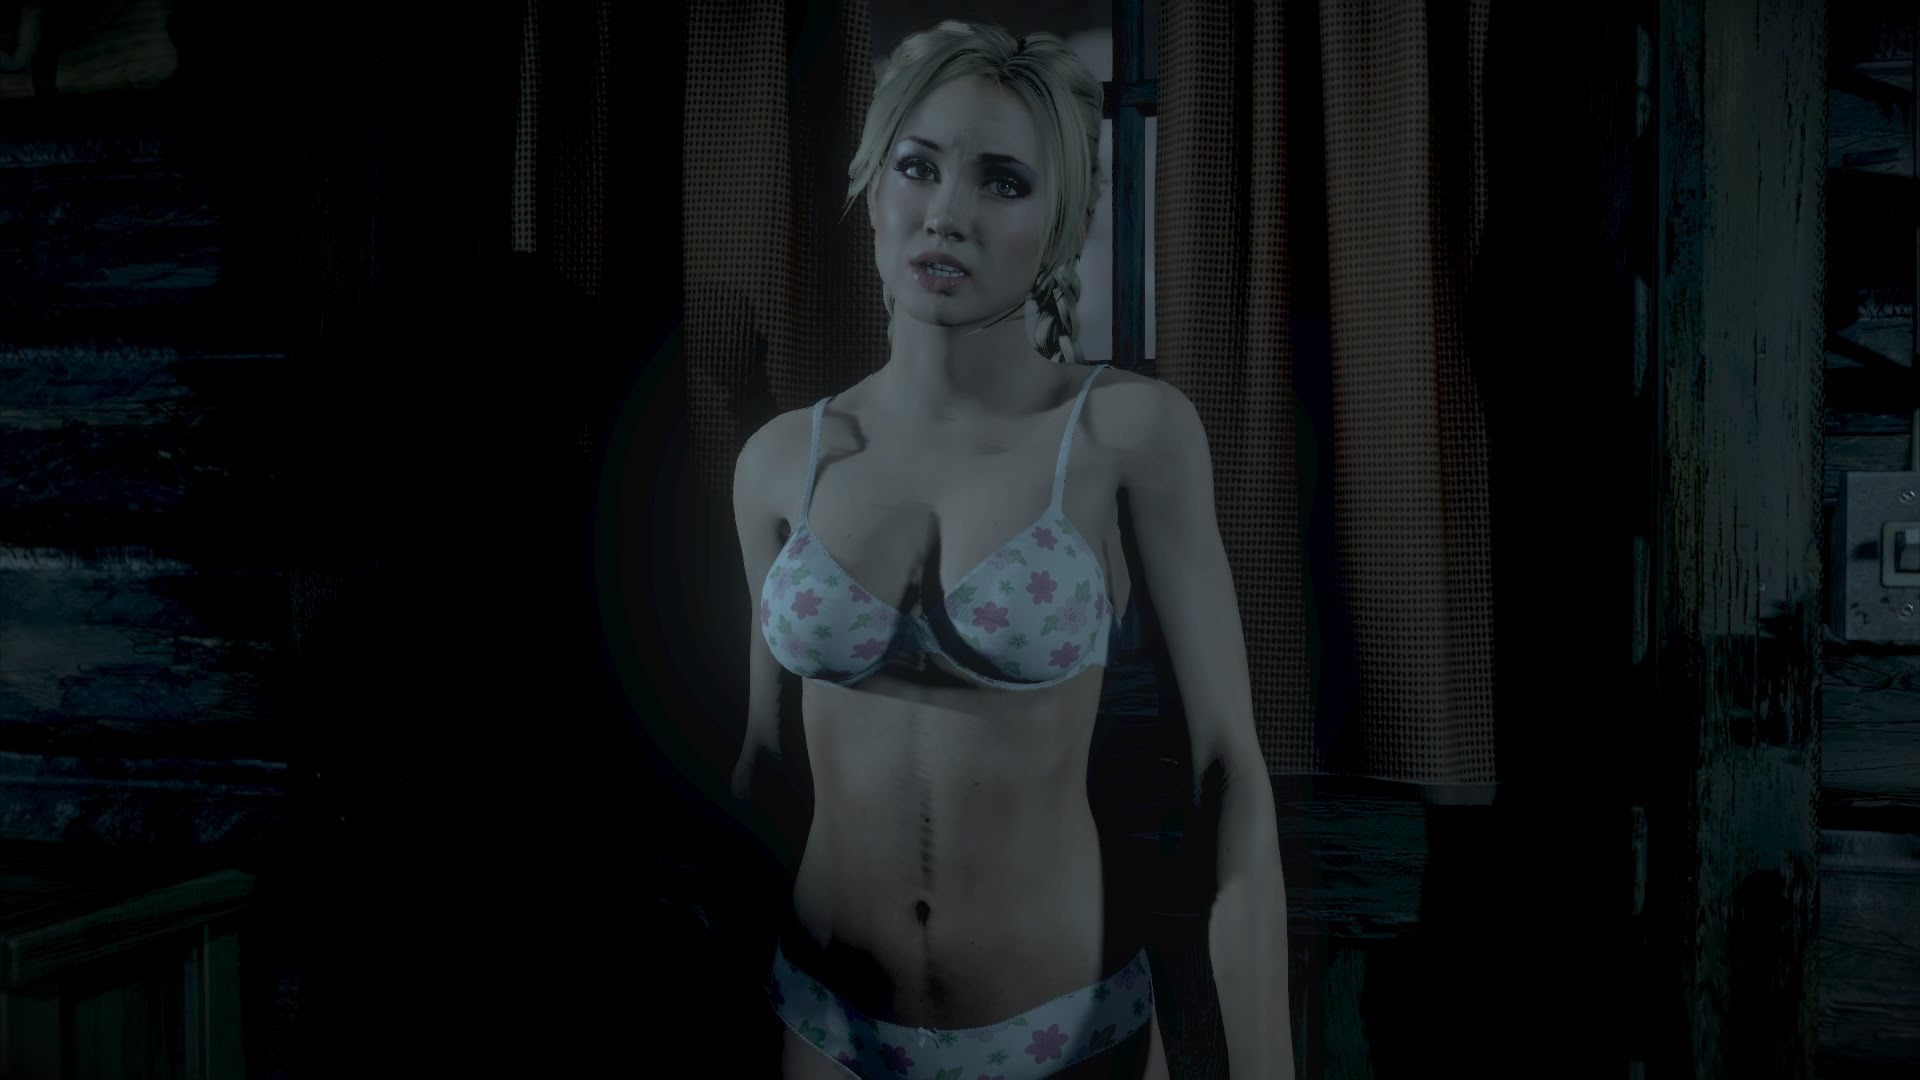 Boobs in Video Games na Twitterze: "Jessica from Until Dawn.